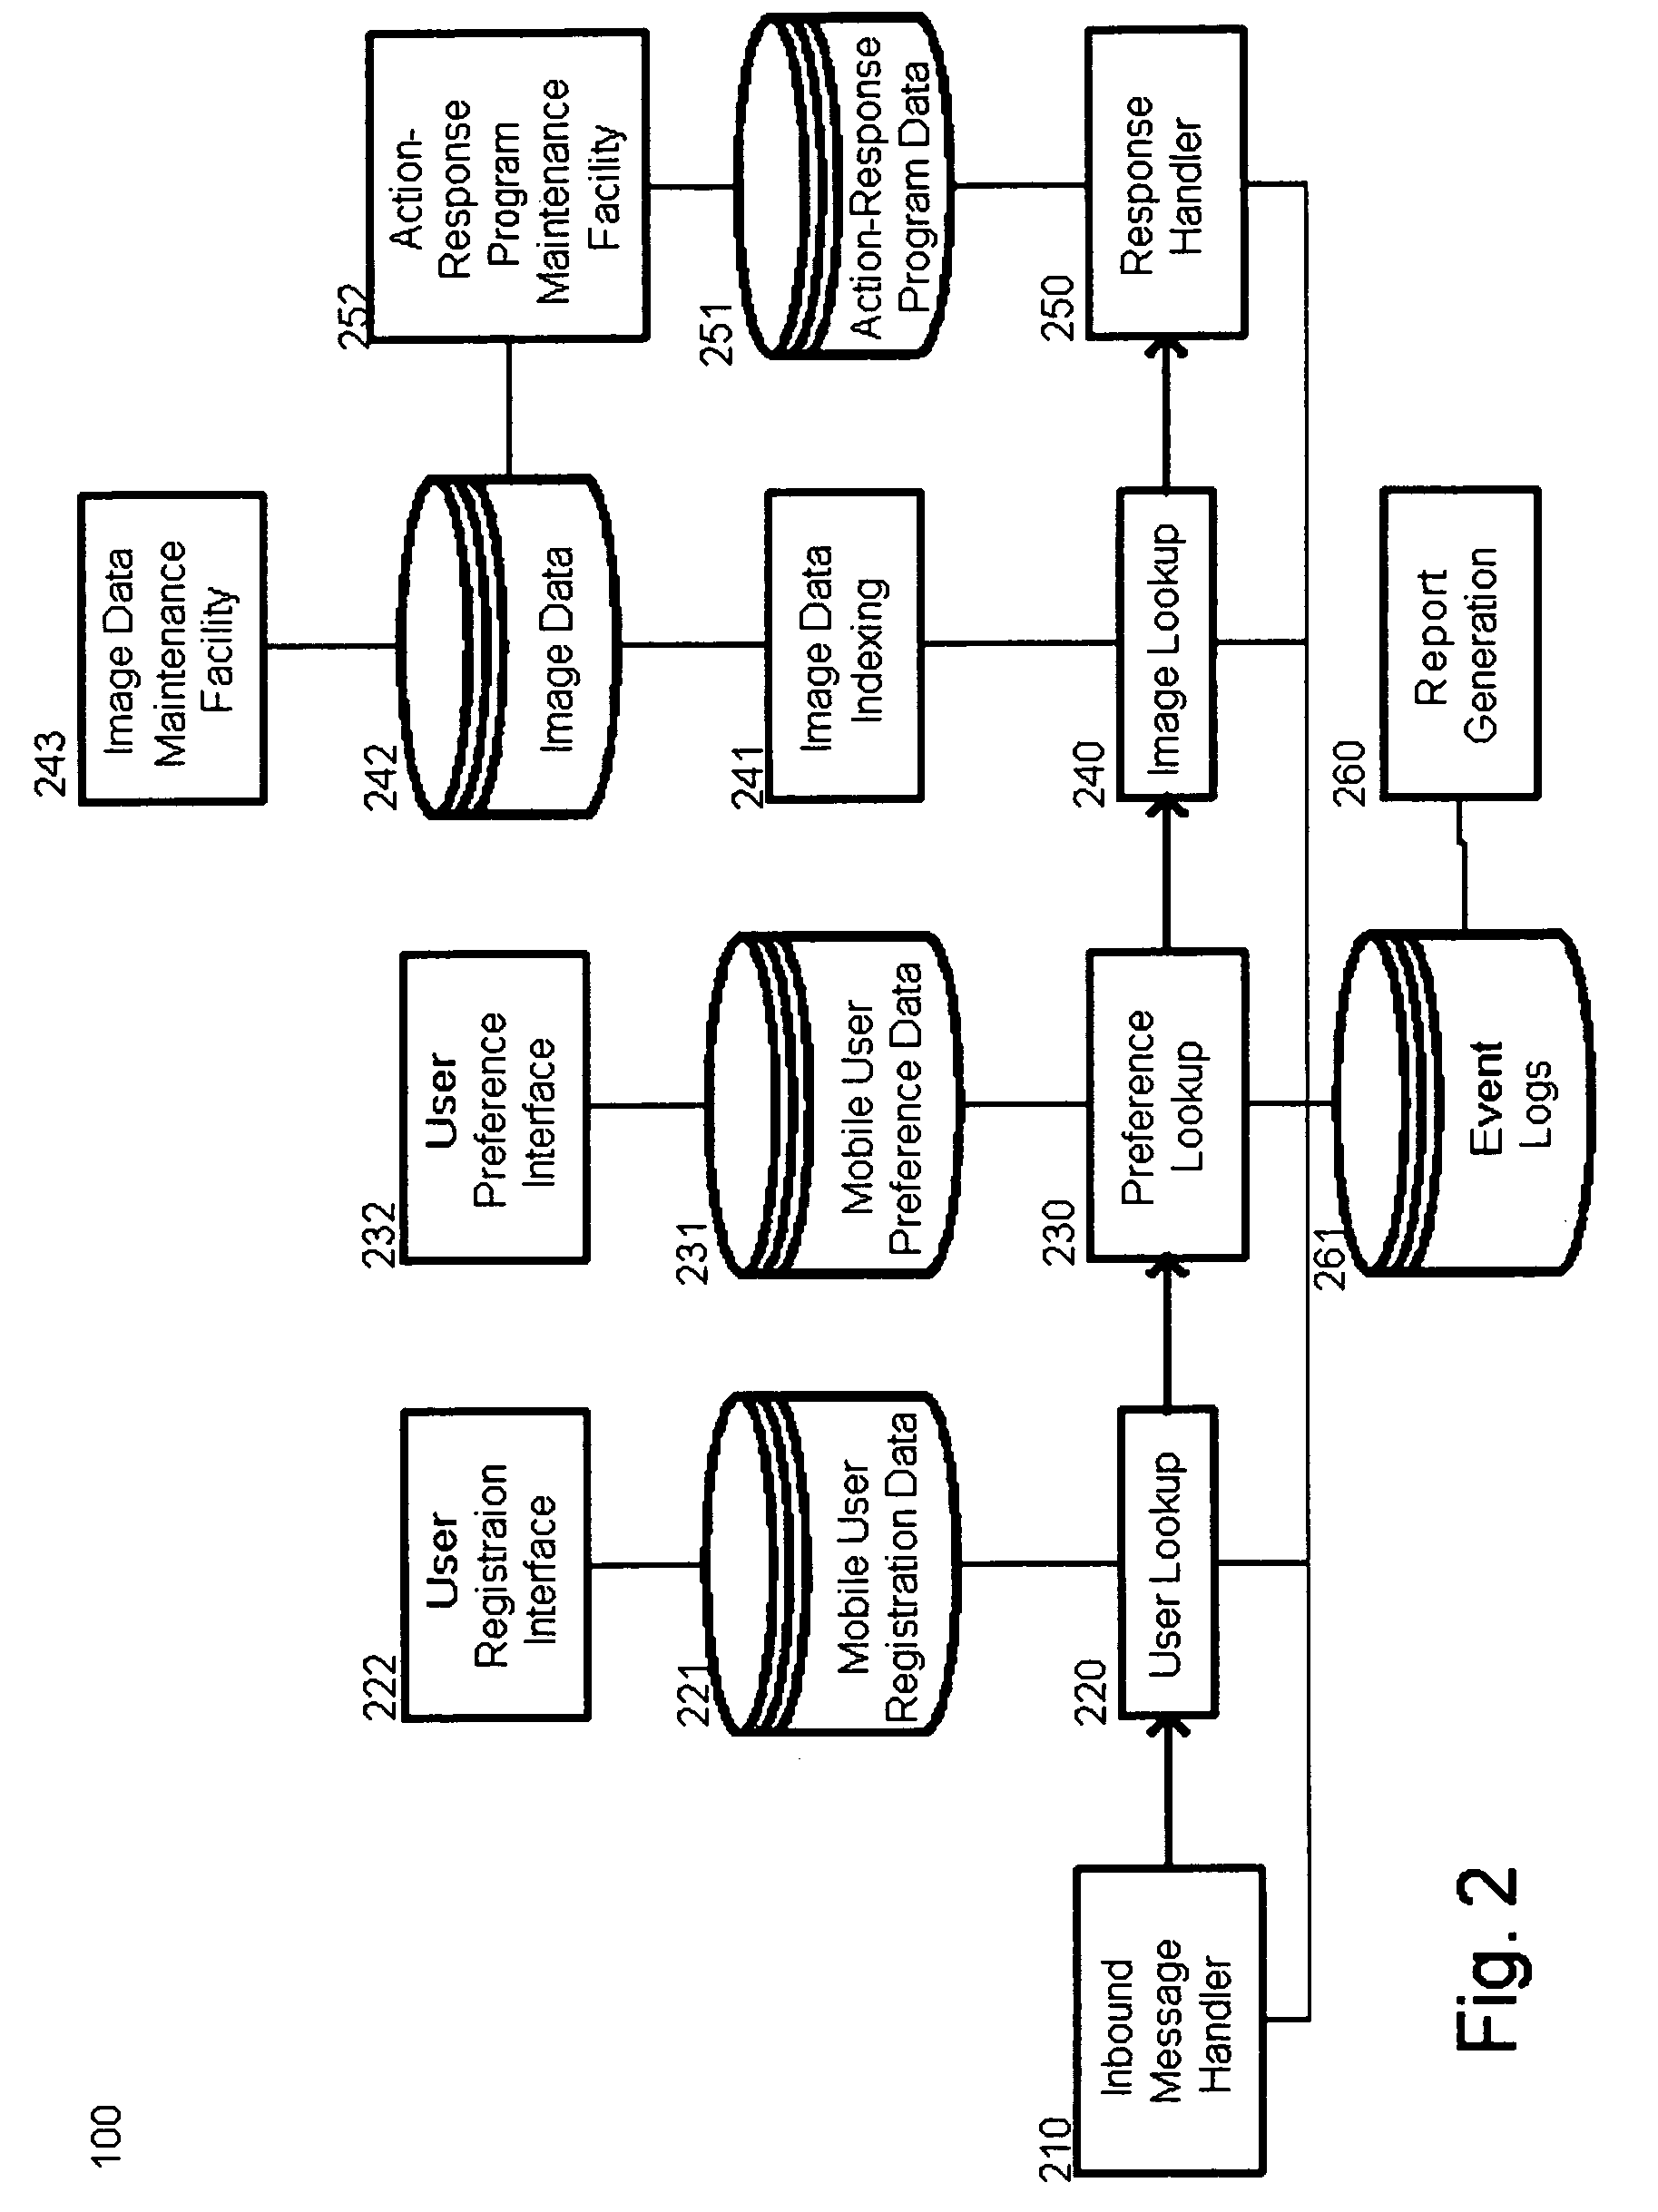 Mobile query system and method based on visual cues